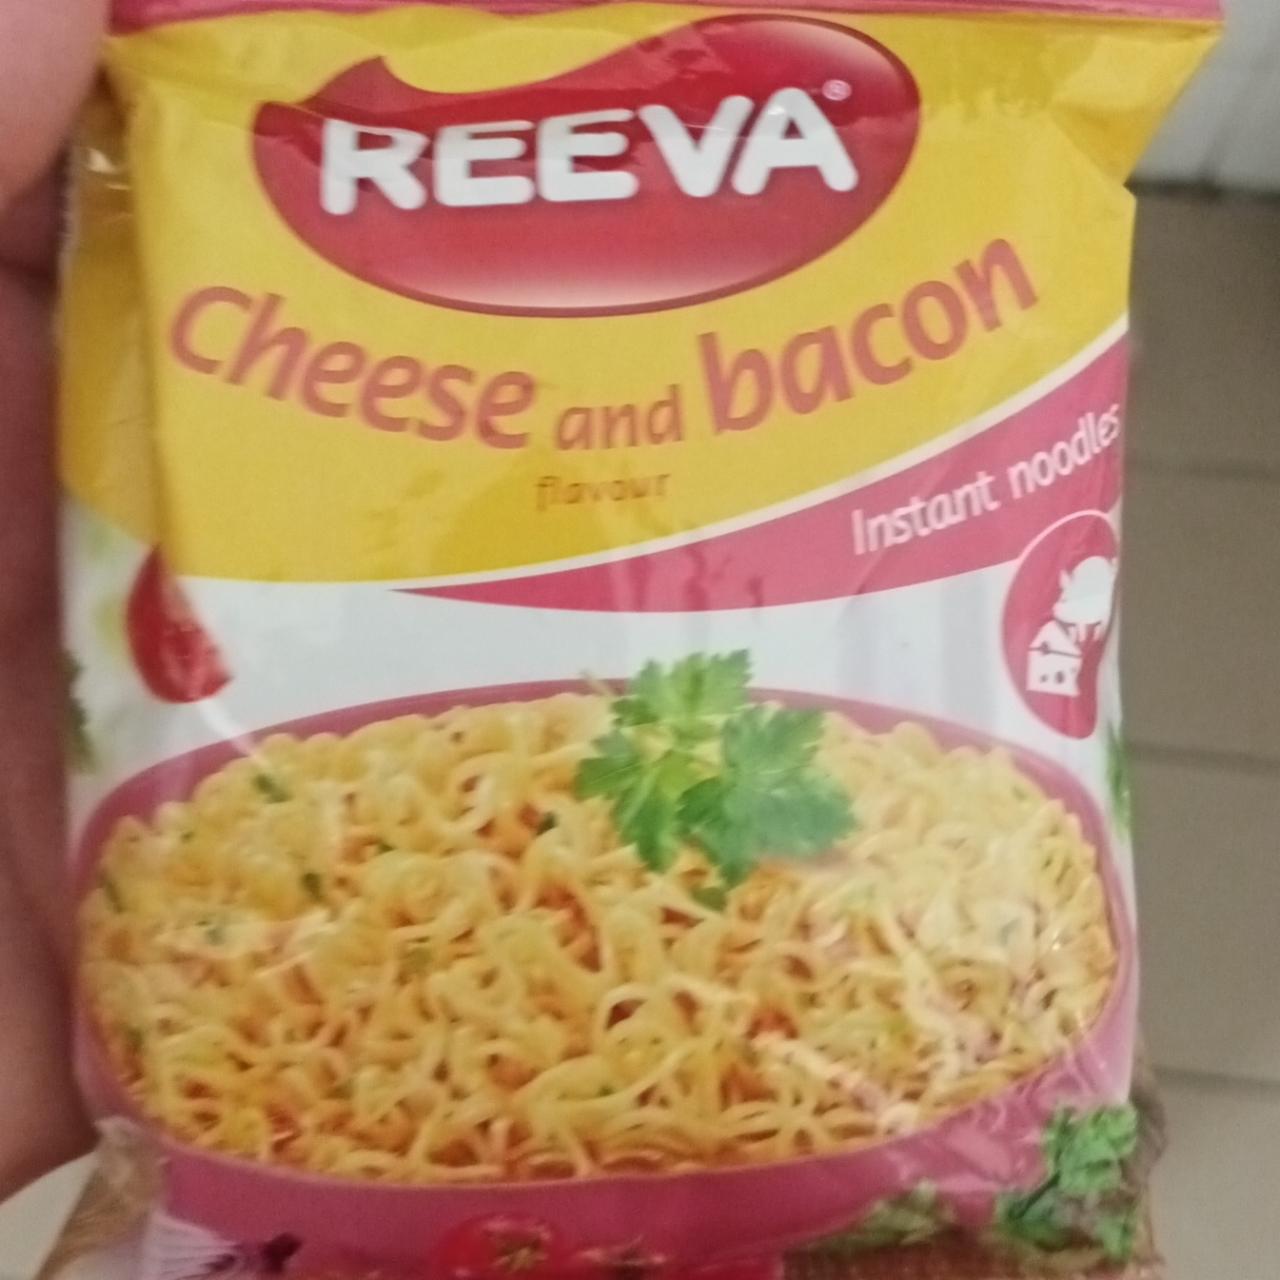 Fotografie - Instant Noodles with cheese and bacon flavour Reeva